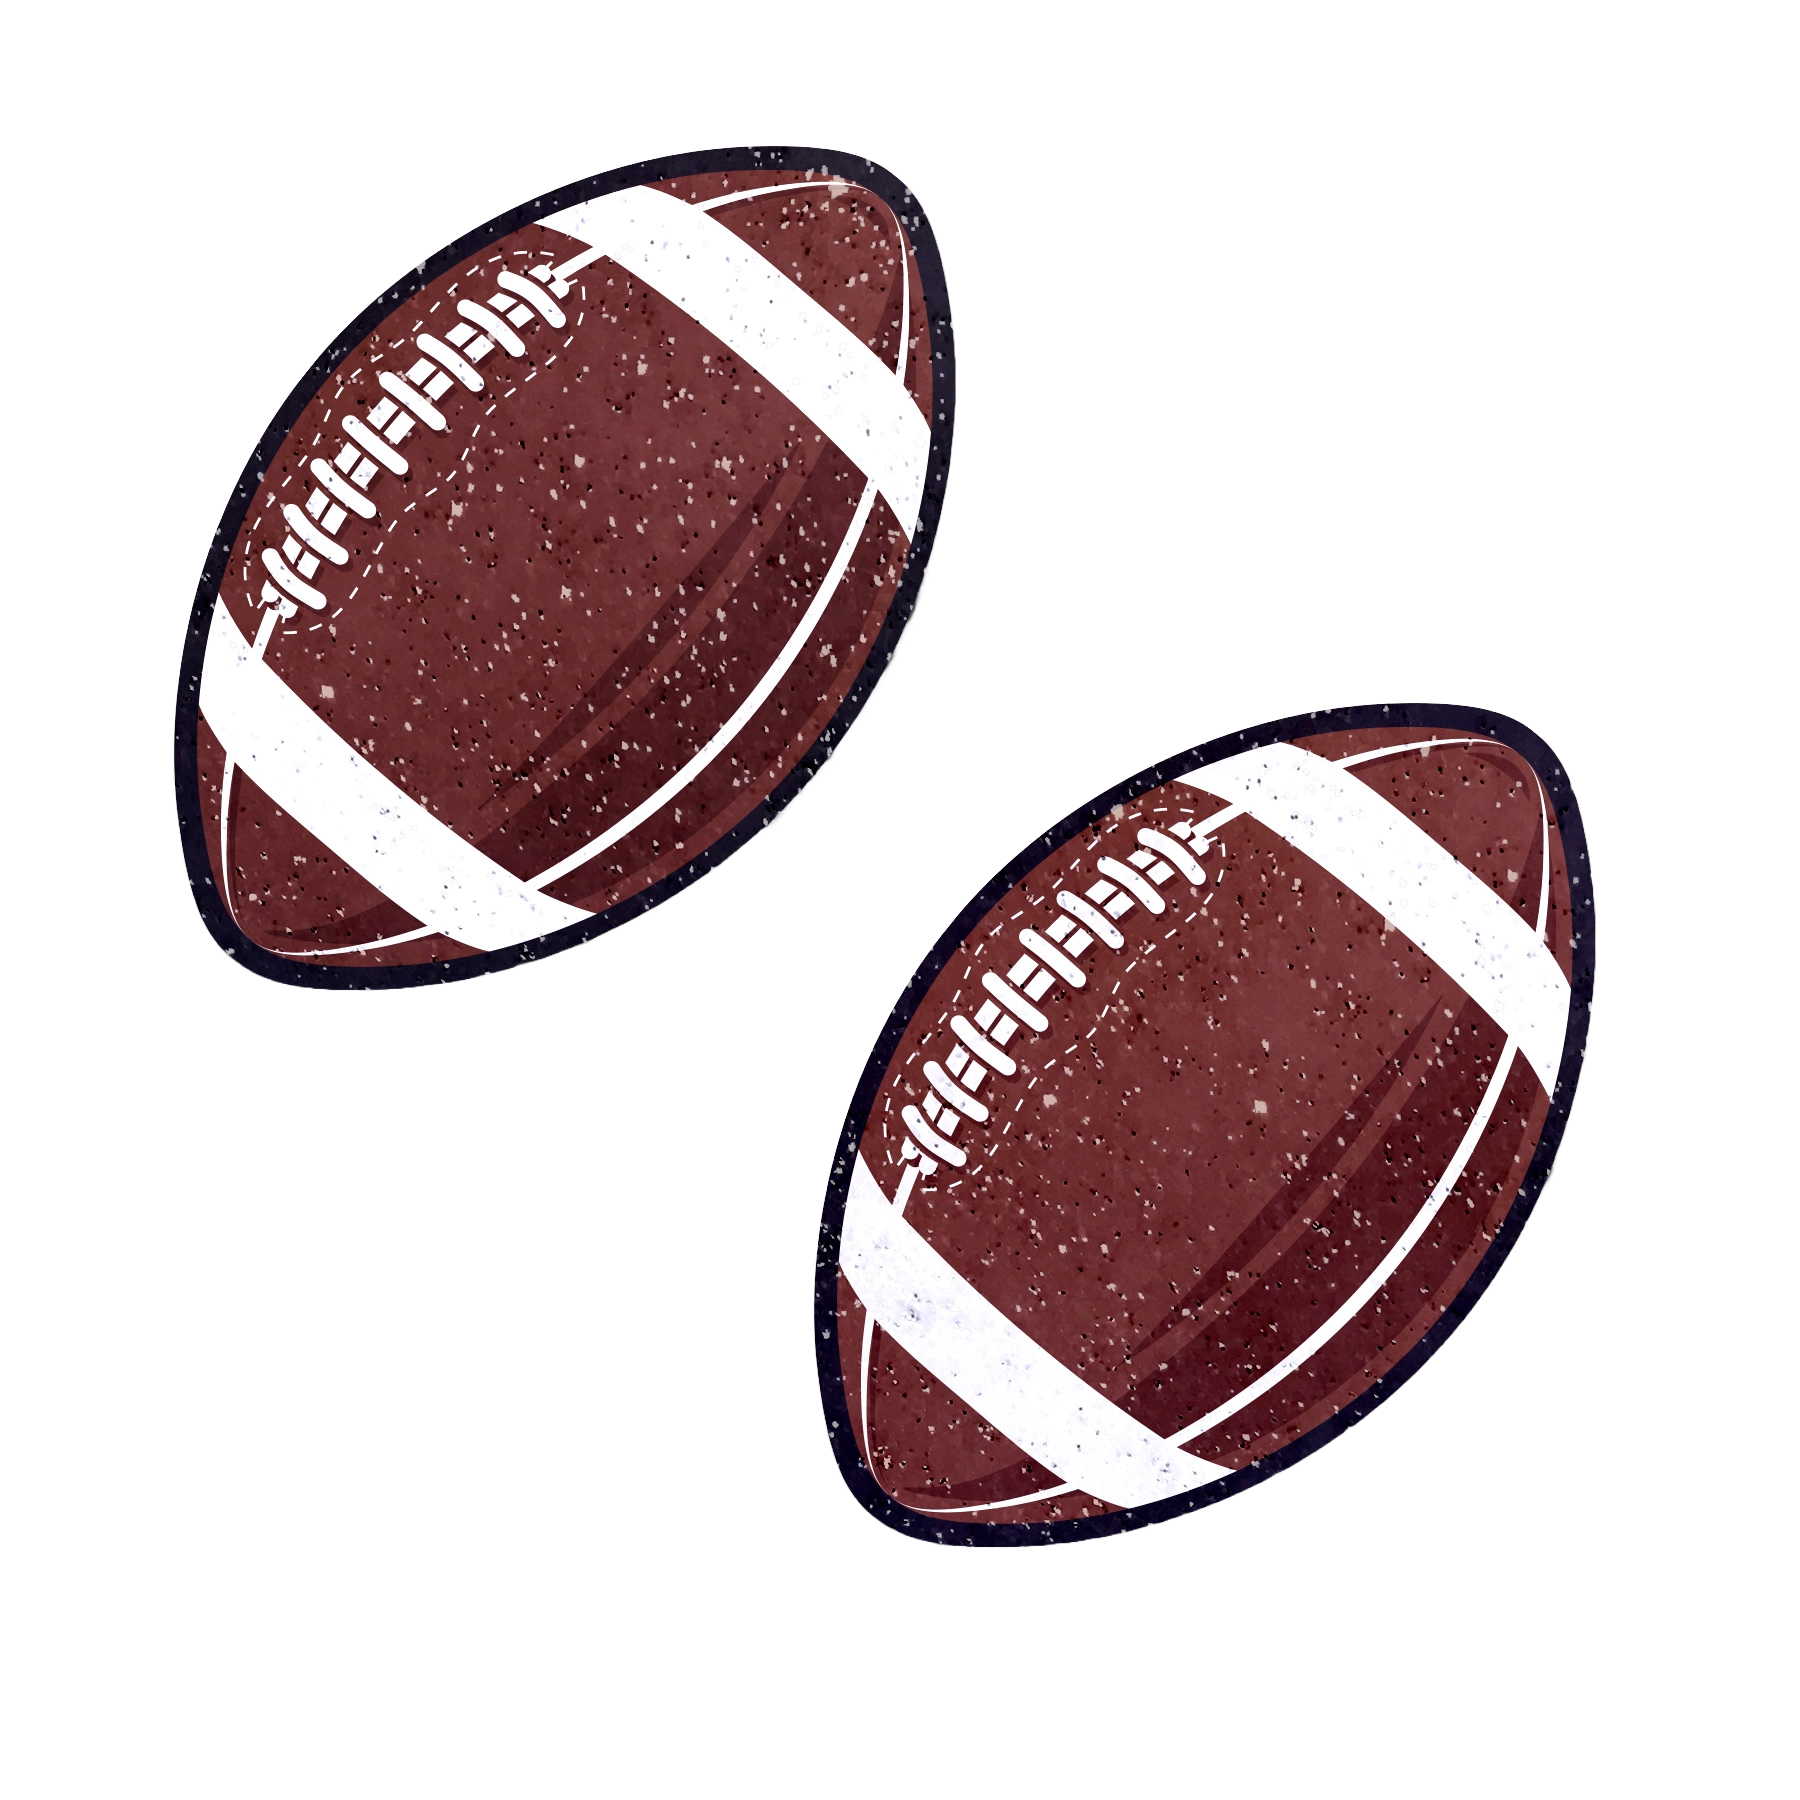 5 Pack: Football Pasties on Sparkly Velvet American Football Nipple Covers by Pastease